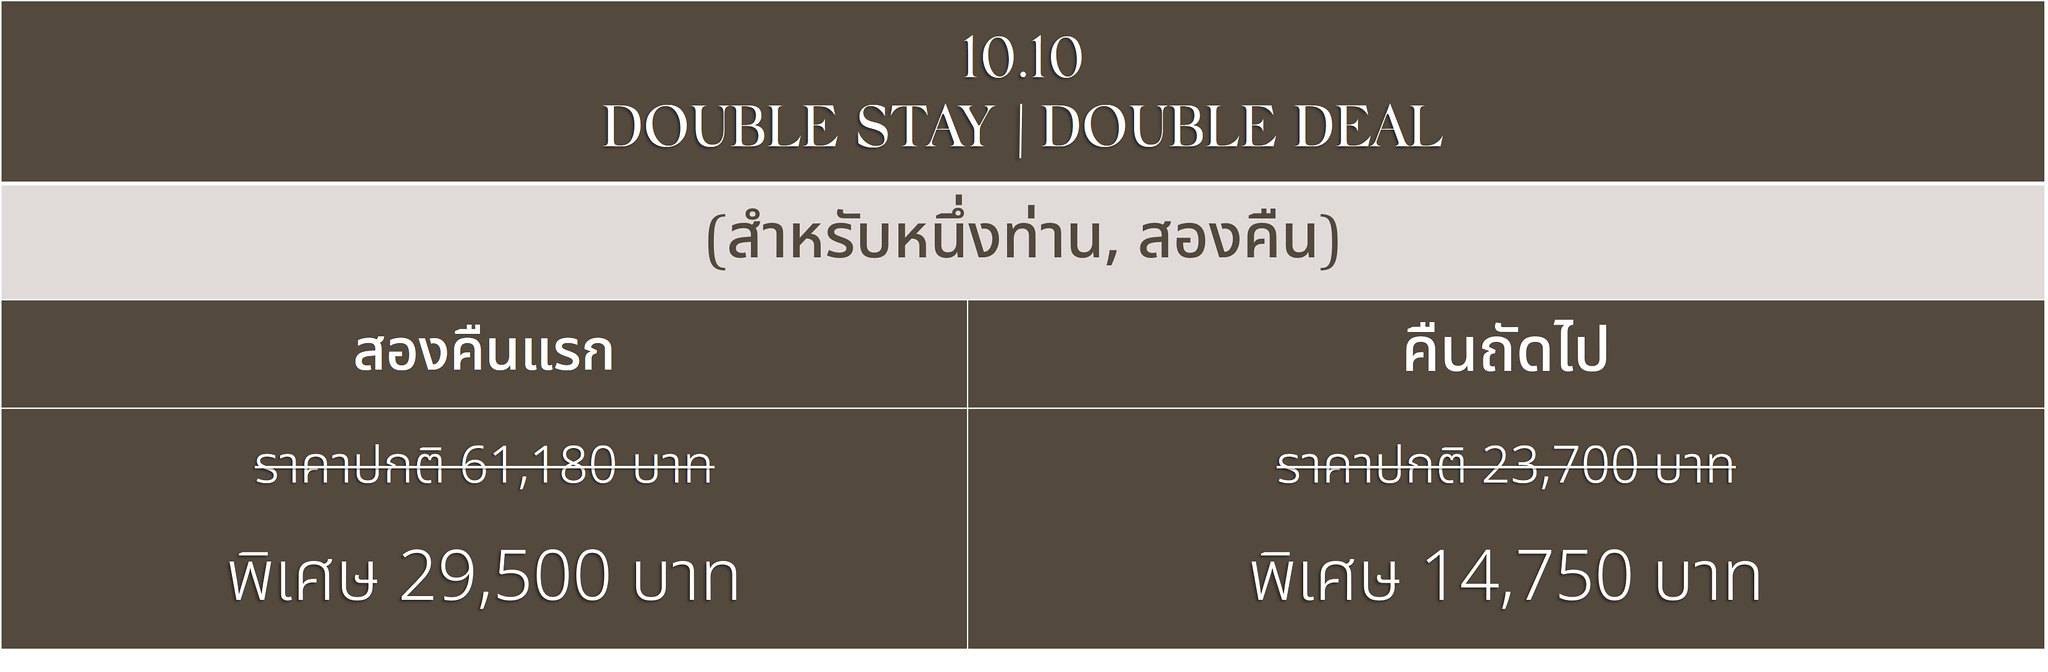 10.10 Double Stay One person TH